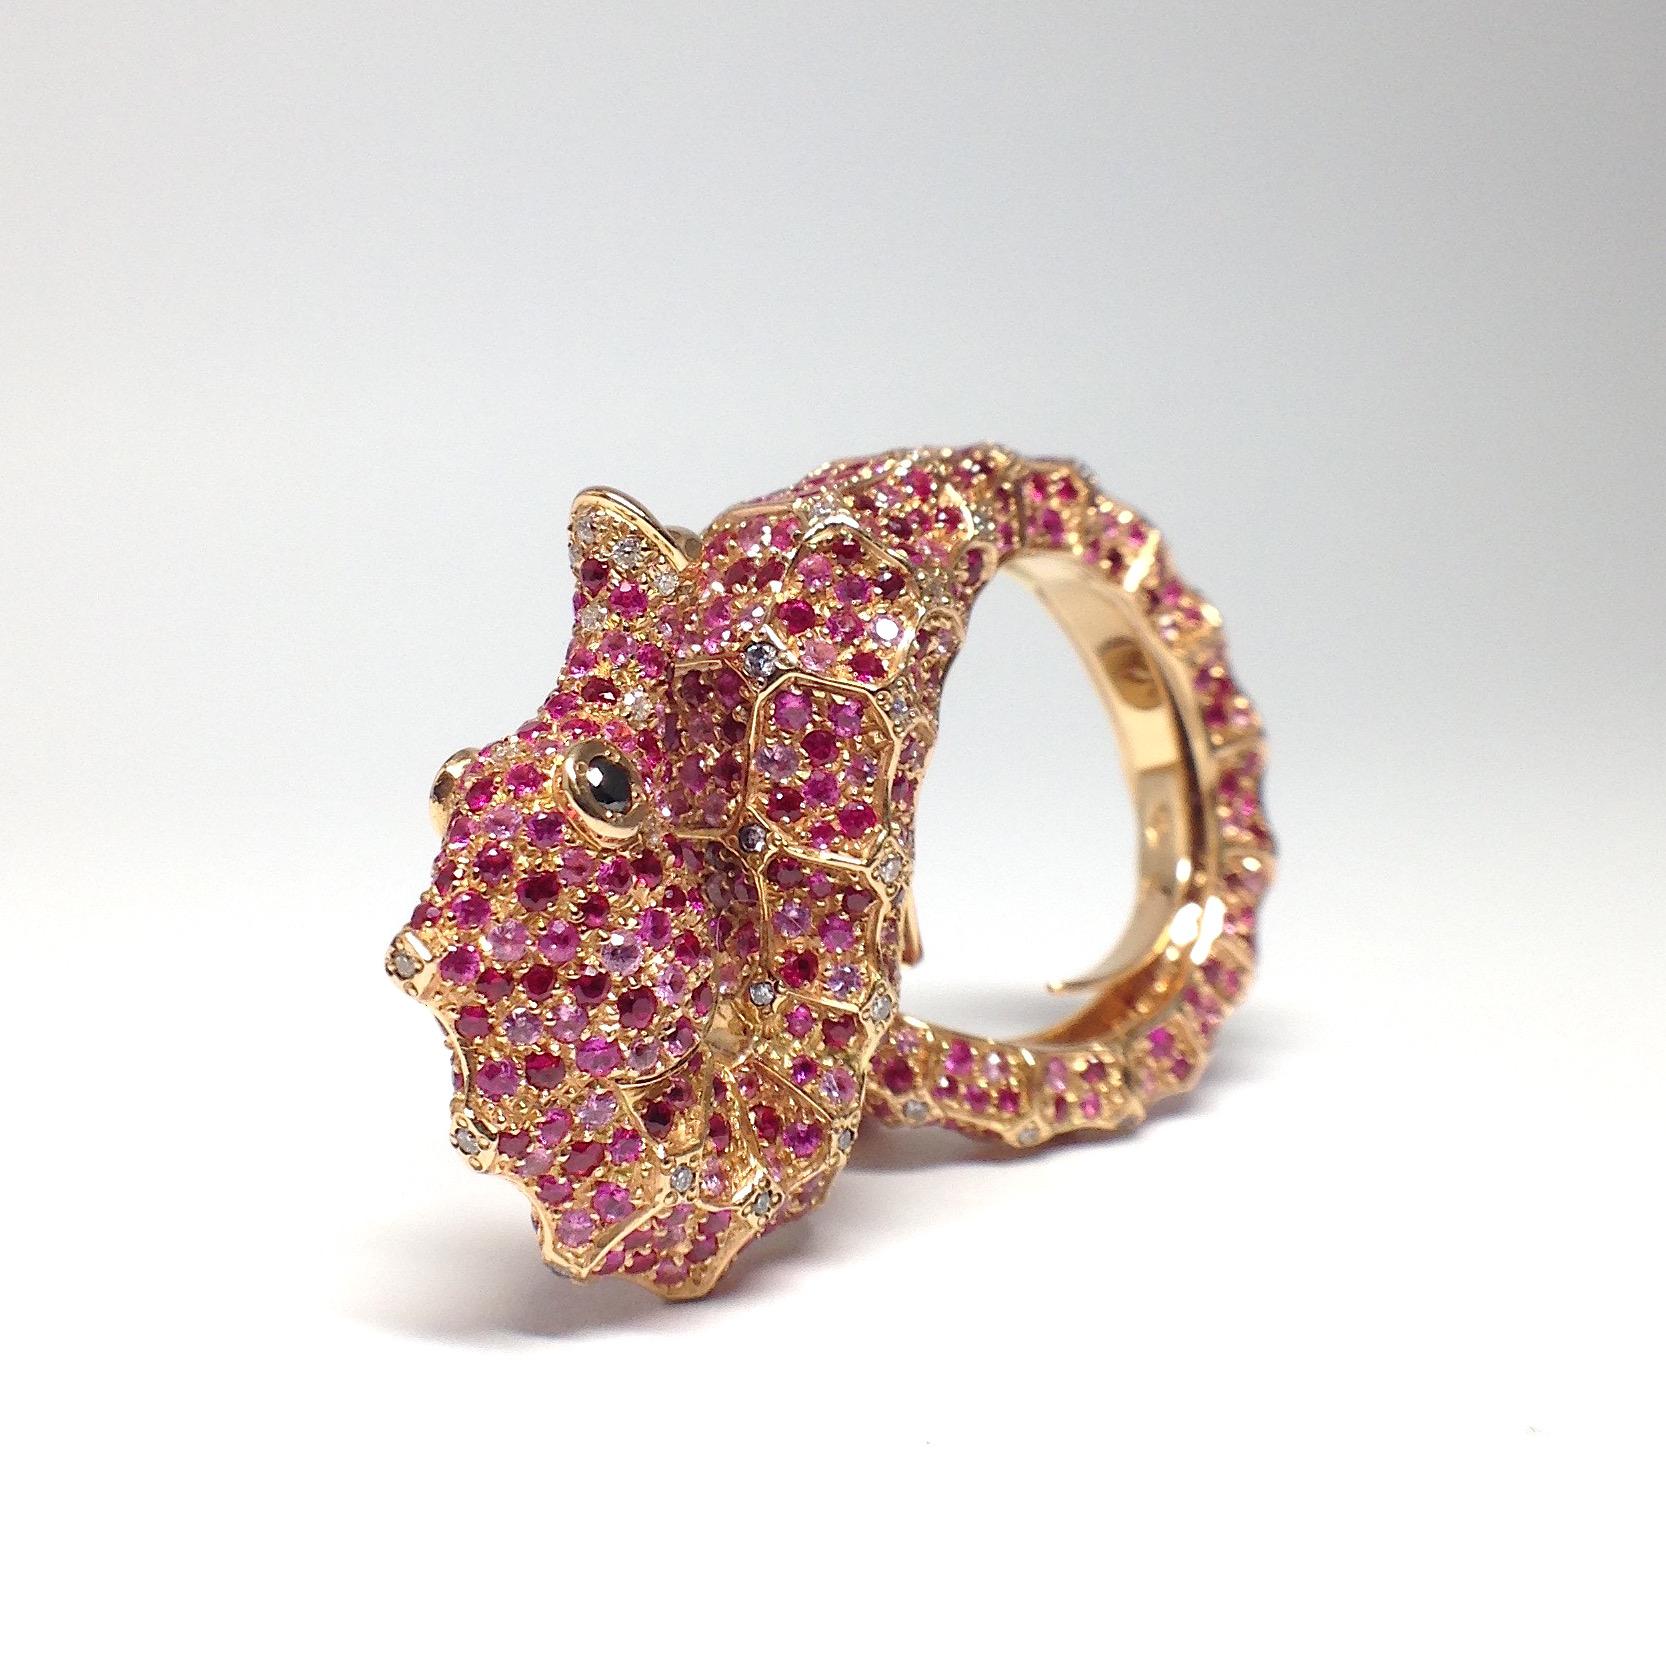 Petronilla Hippocampus Sea Horse Diamond Pink Sapphire Ruby 18Kt Gold Ring 1